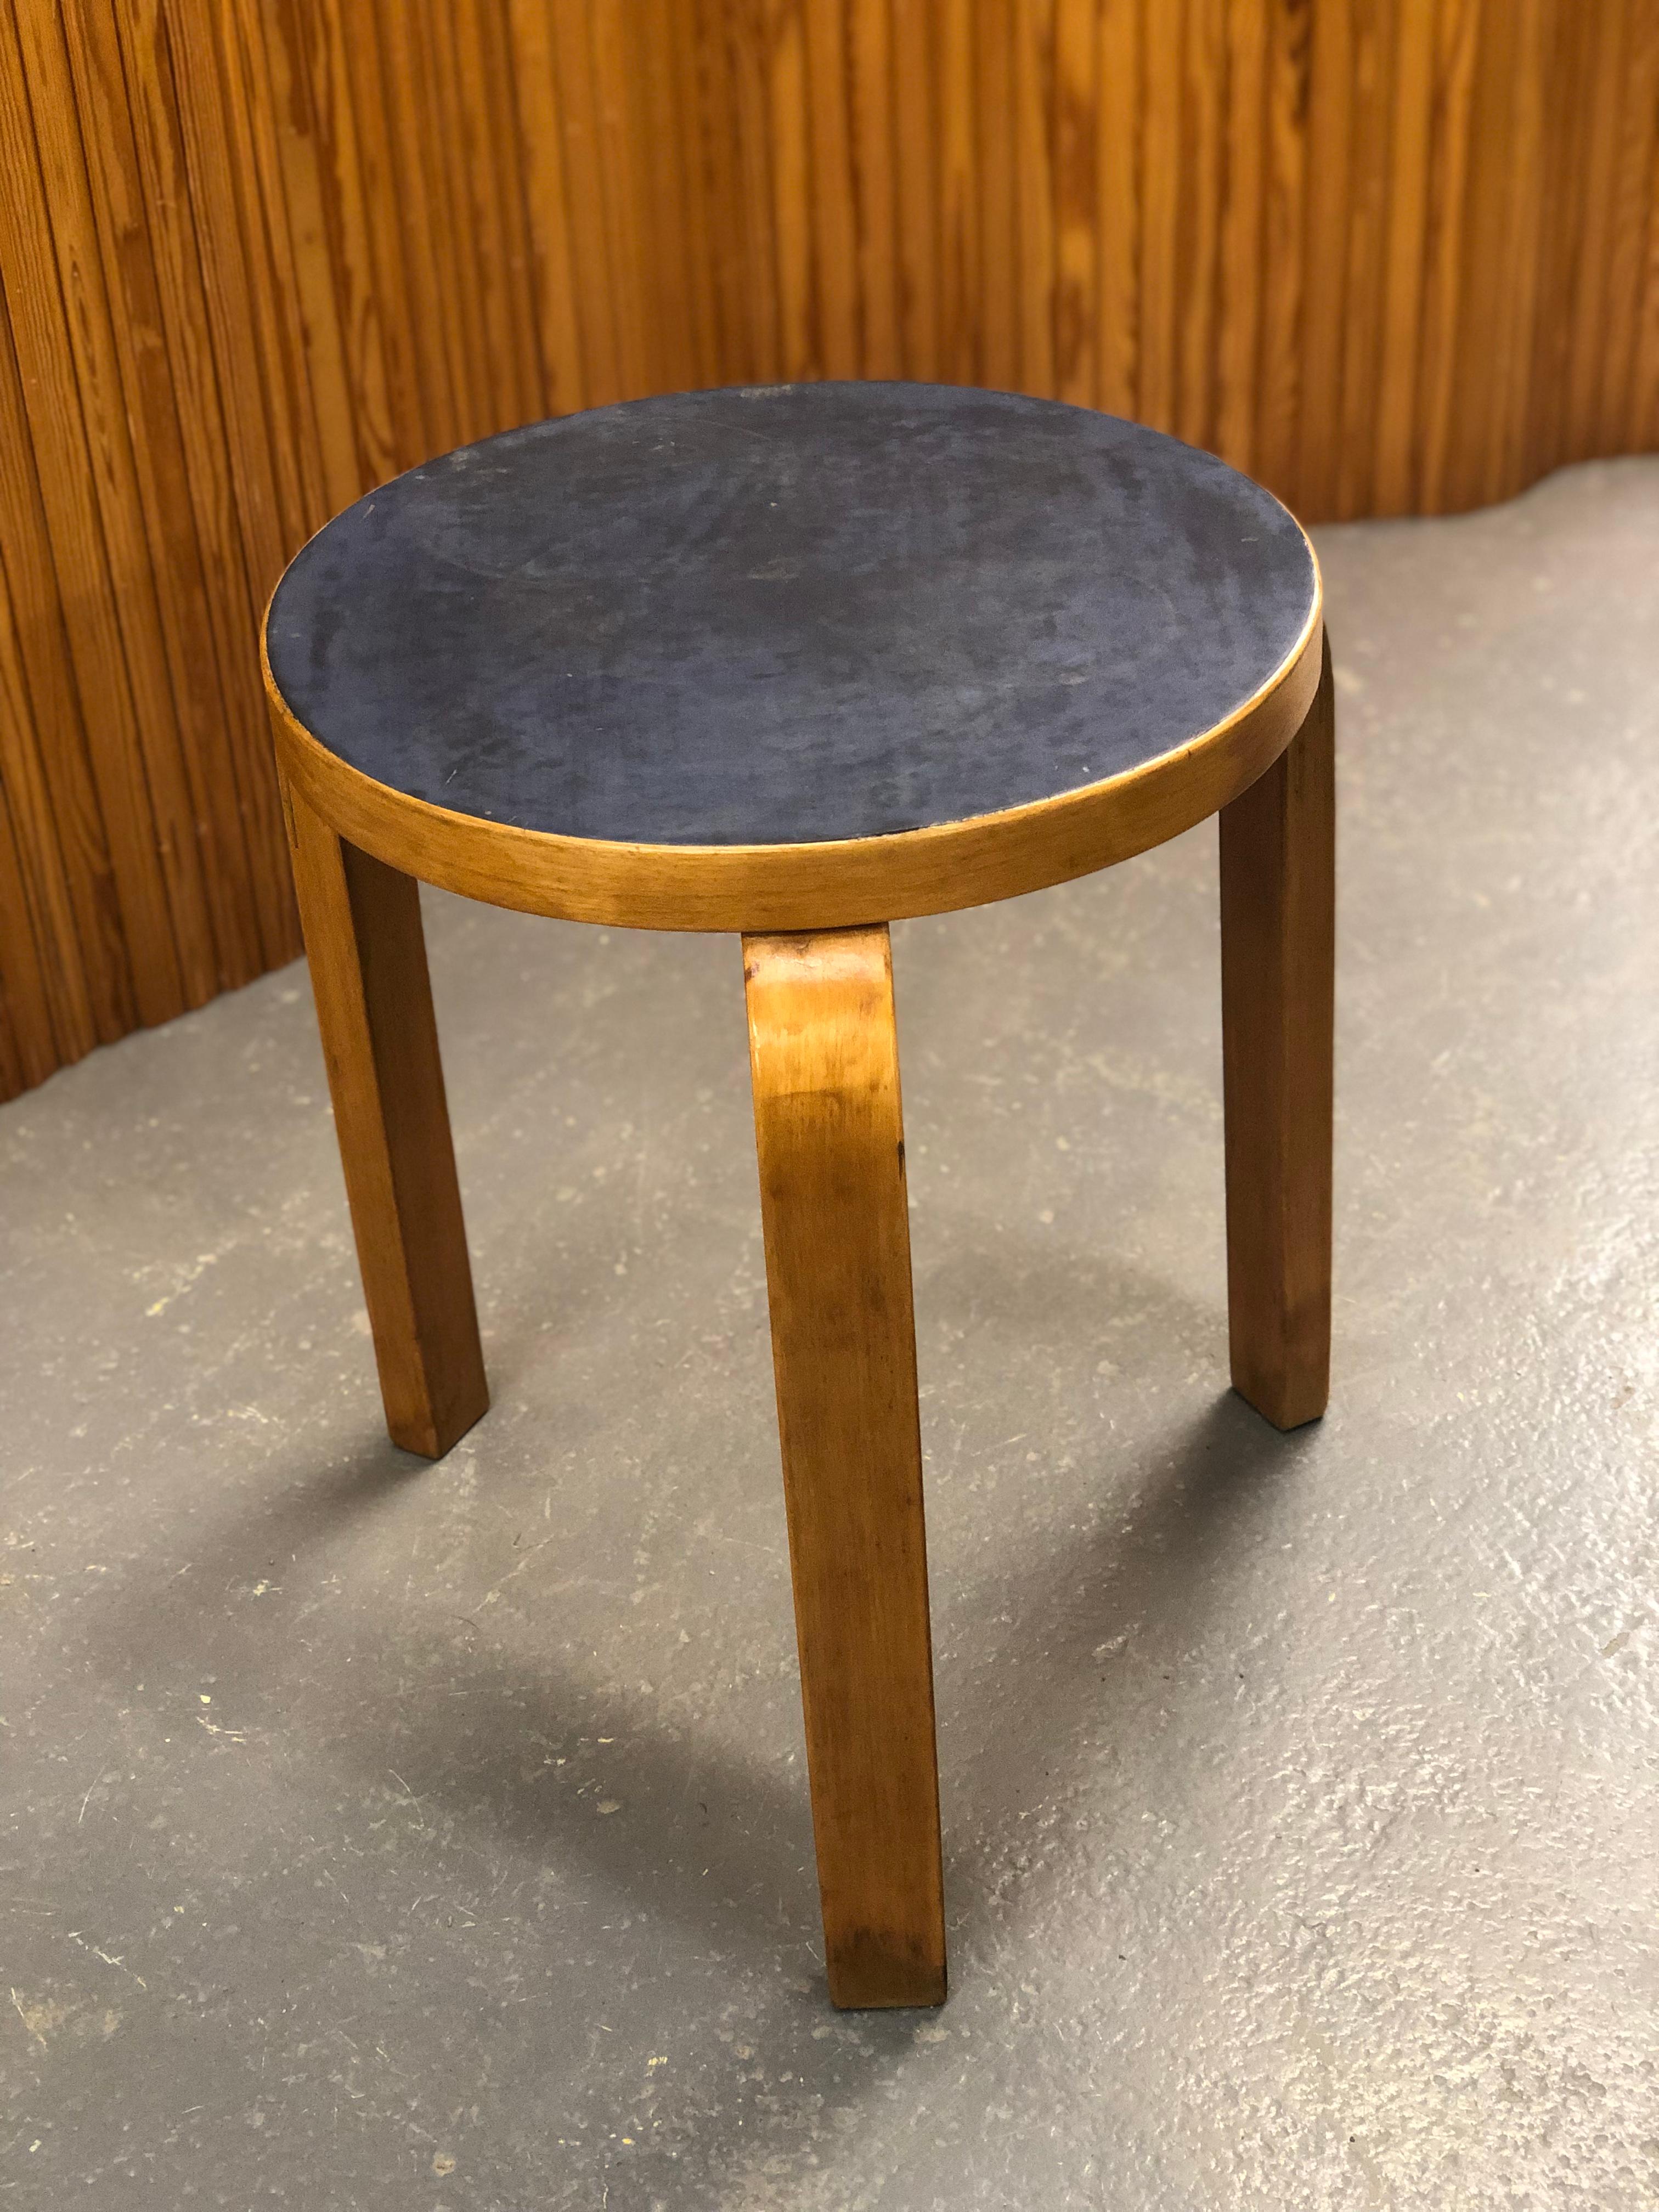 Artek stool in birch and blue linoleum, designed by Alvar Aalto and manufactured by Artek in the 1950s. The model 60 stool is perhaps the most well known Aalto design and has always been attractive to people. As with a lot of Alvar Aalto's works the